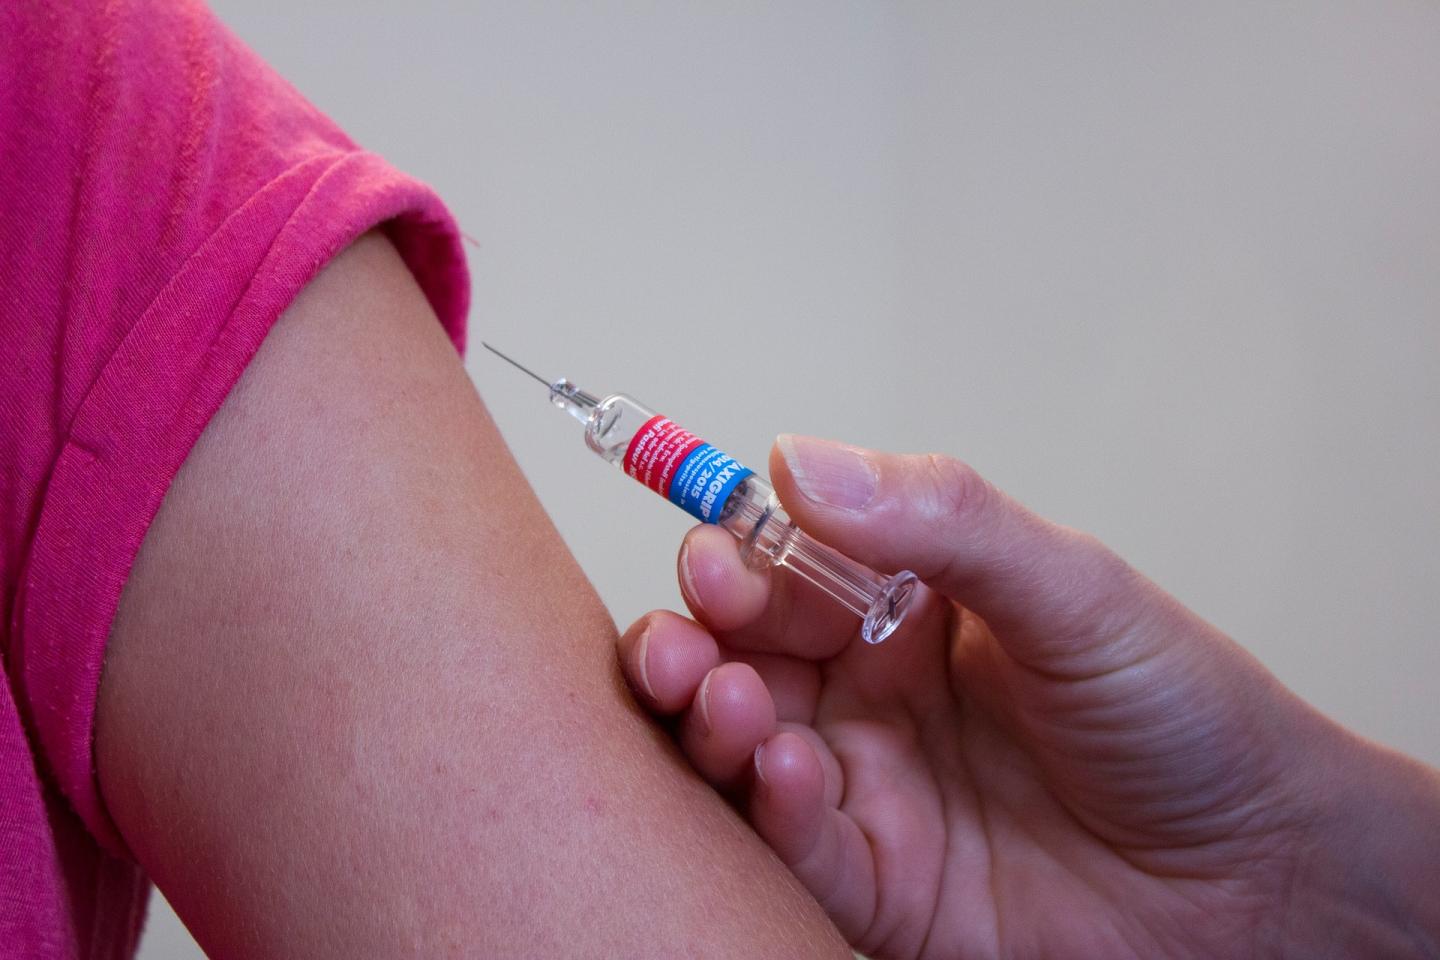 California's Stricter Vaccine Exemption Policy and Improved Vaccination Rates